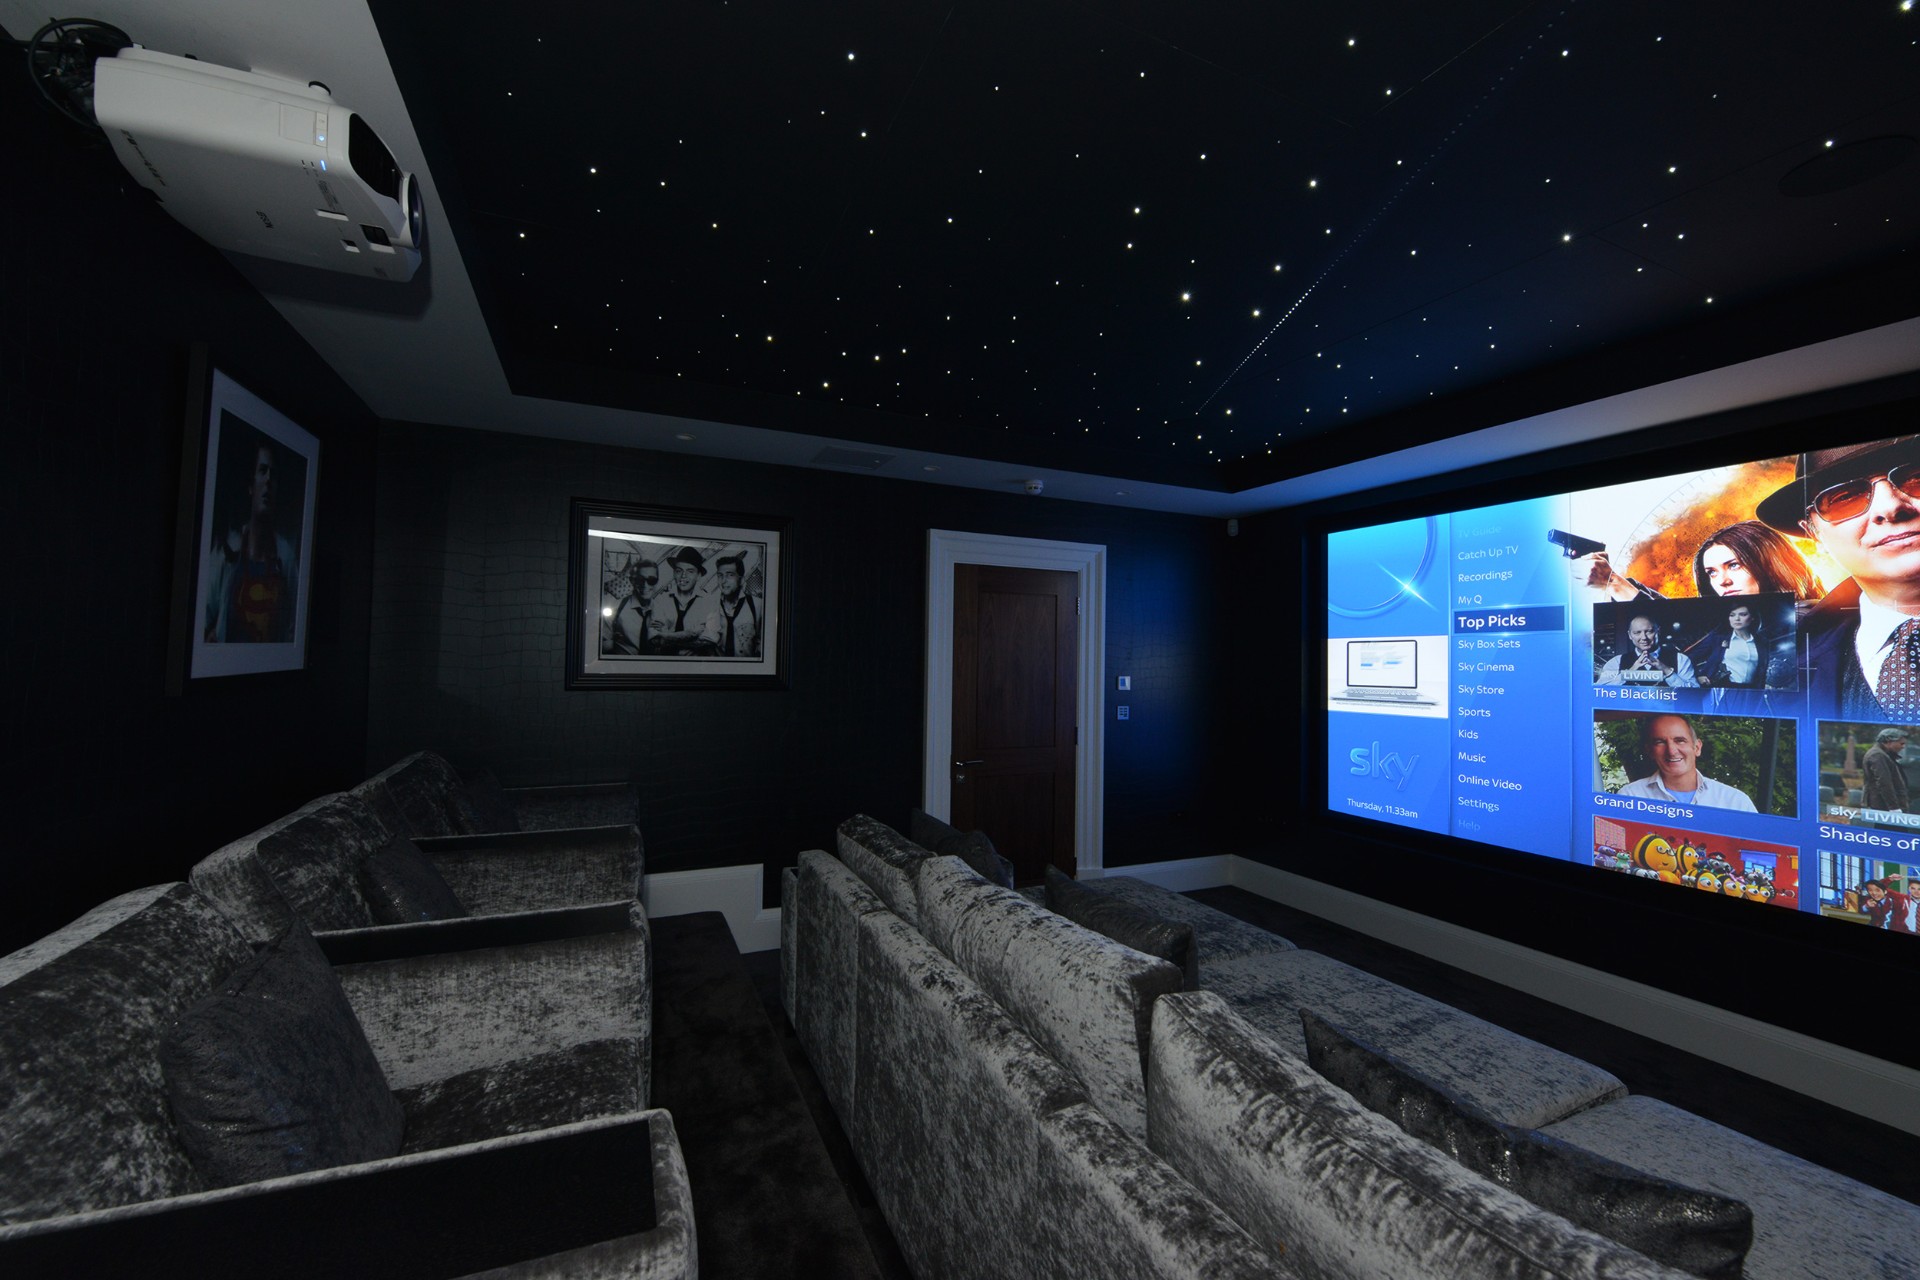 Starstruck by Dolby Atmos Image